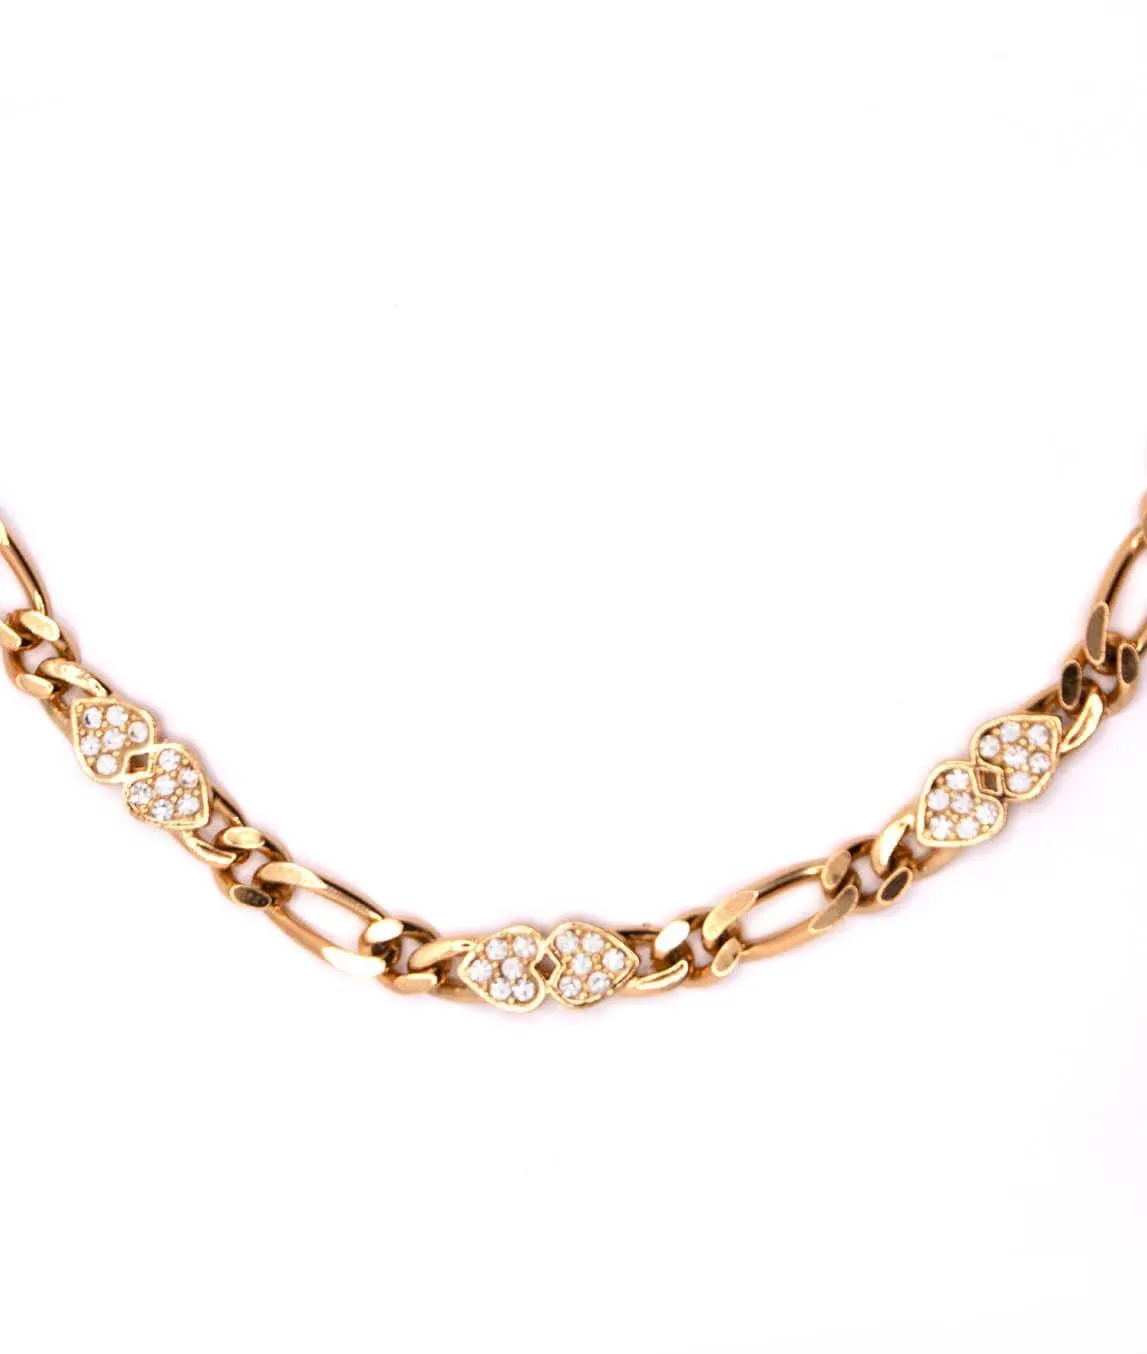 Rhinestone-set  hearts on gold tone necklace by Grosse of Christian Dior